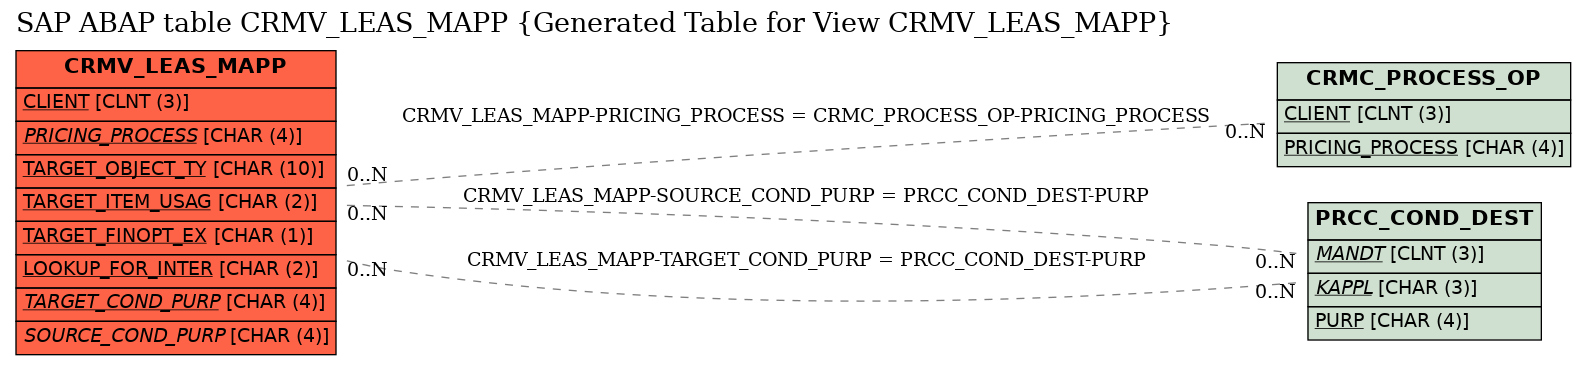 E-R Diagram for table CRMV_LEAS_MAPP (Generated Table for View CRMV_LEAS_MAPP)